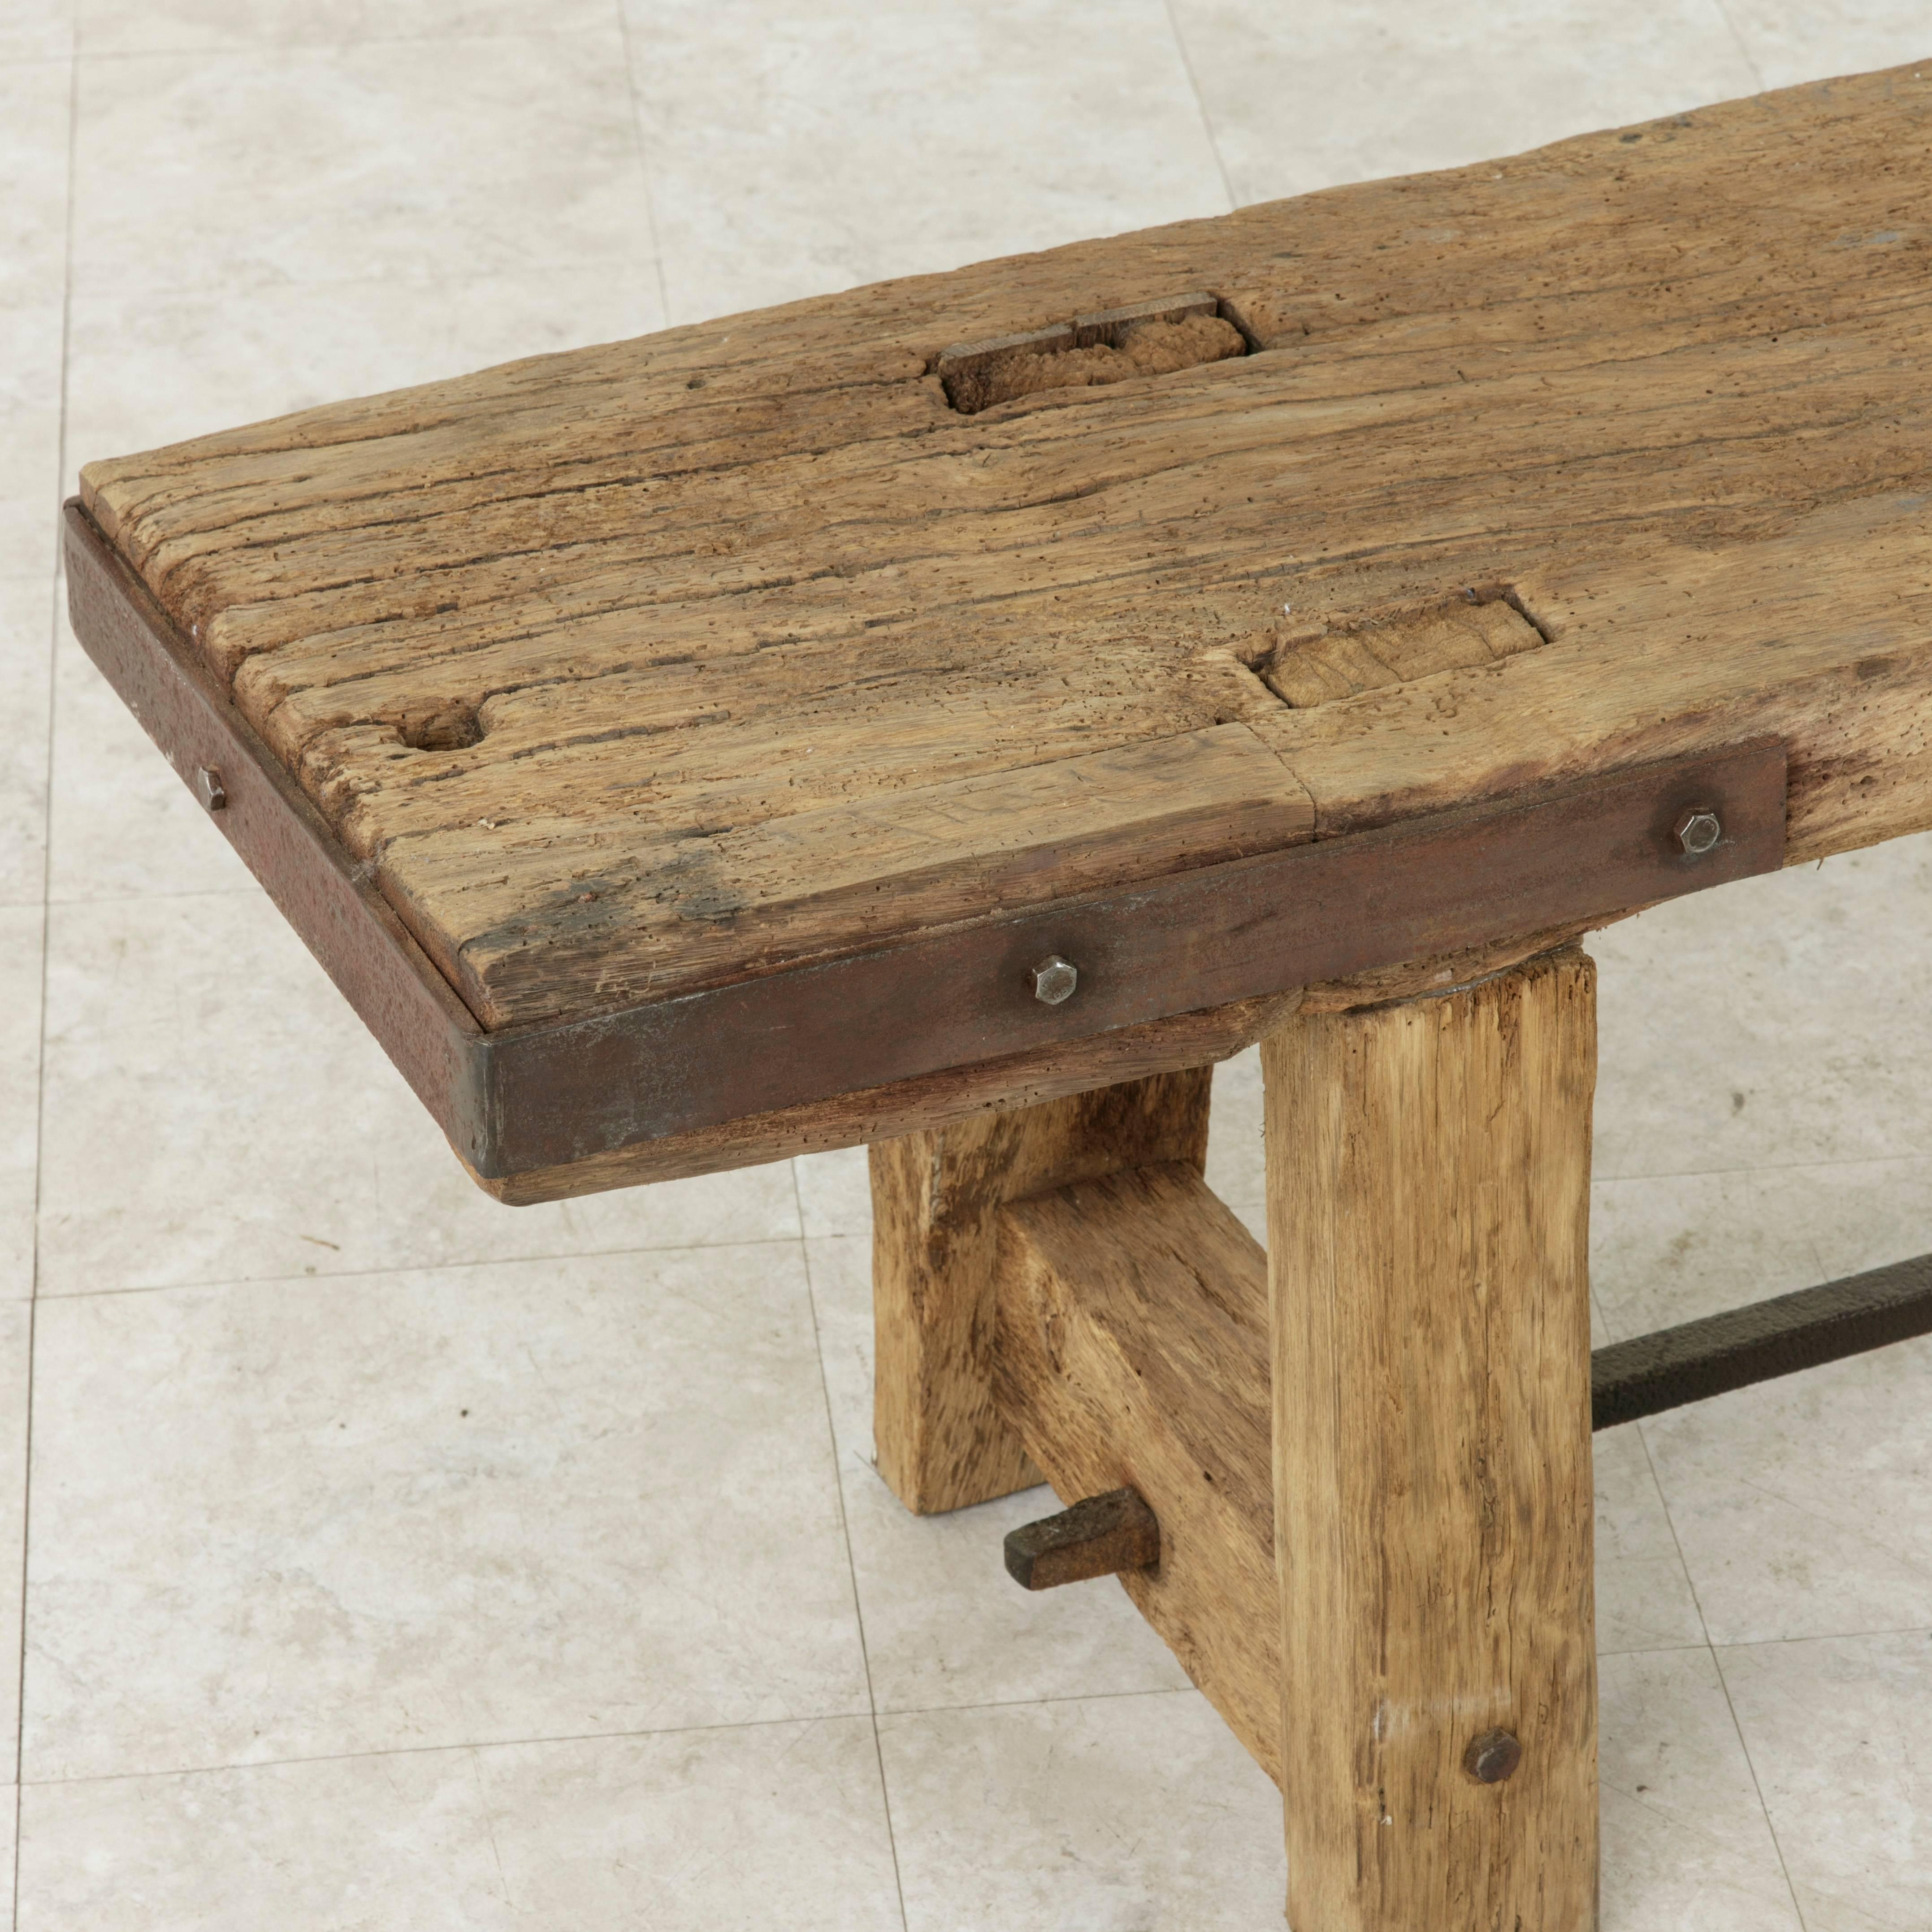 Long Rustic French Oak Bench in Natural Finish with Iron Corners and Crossbar 1